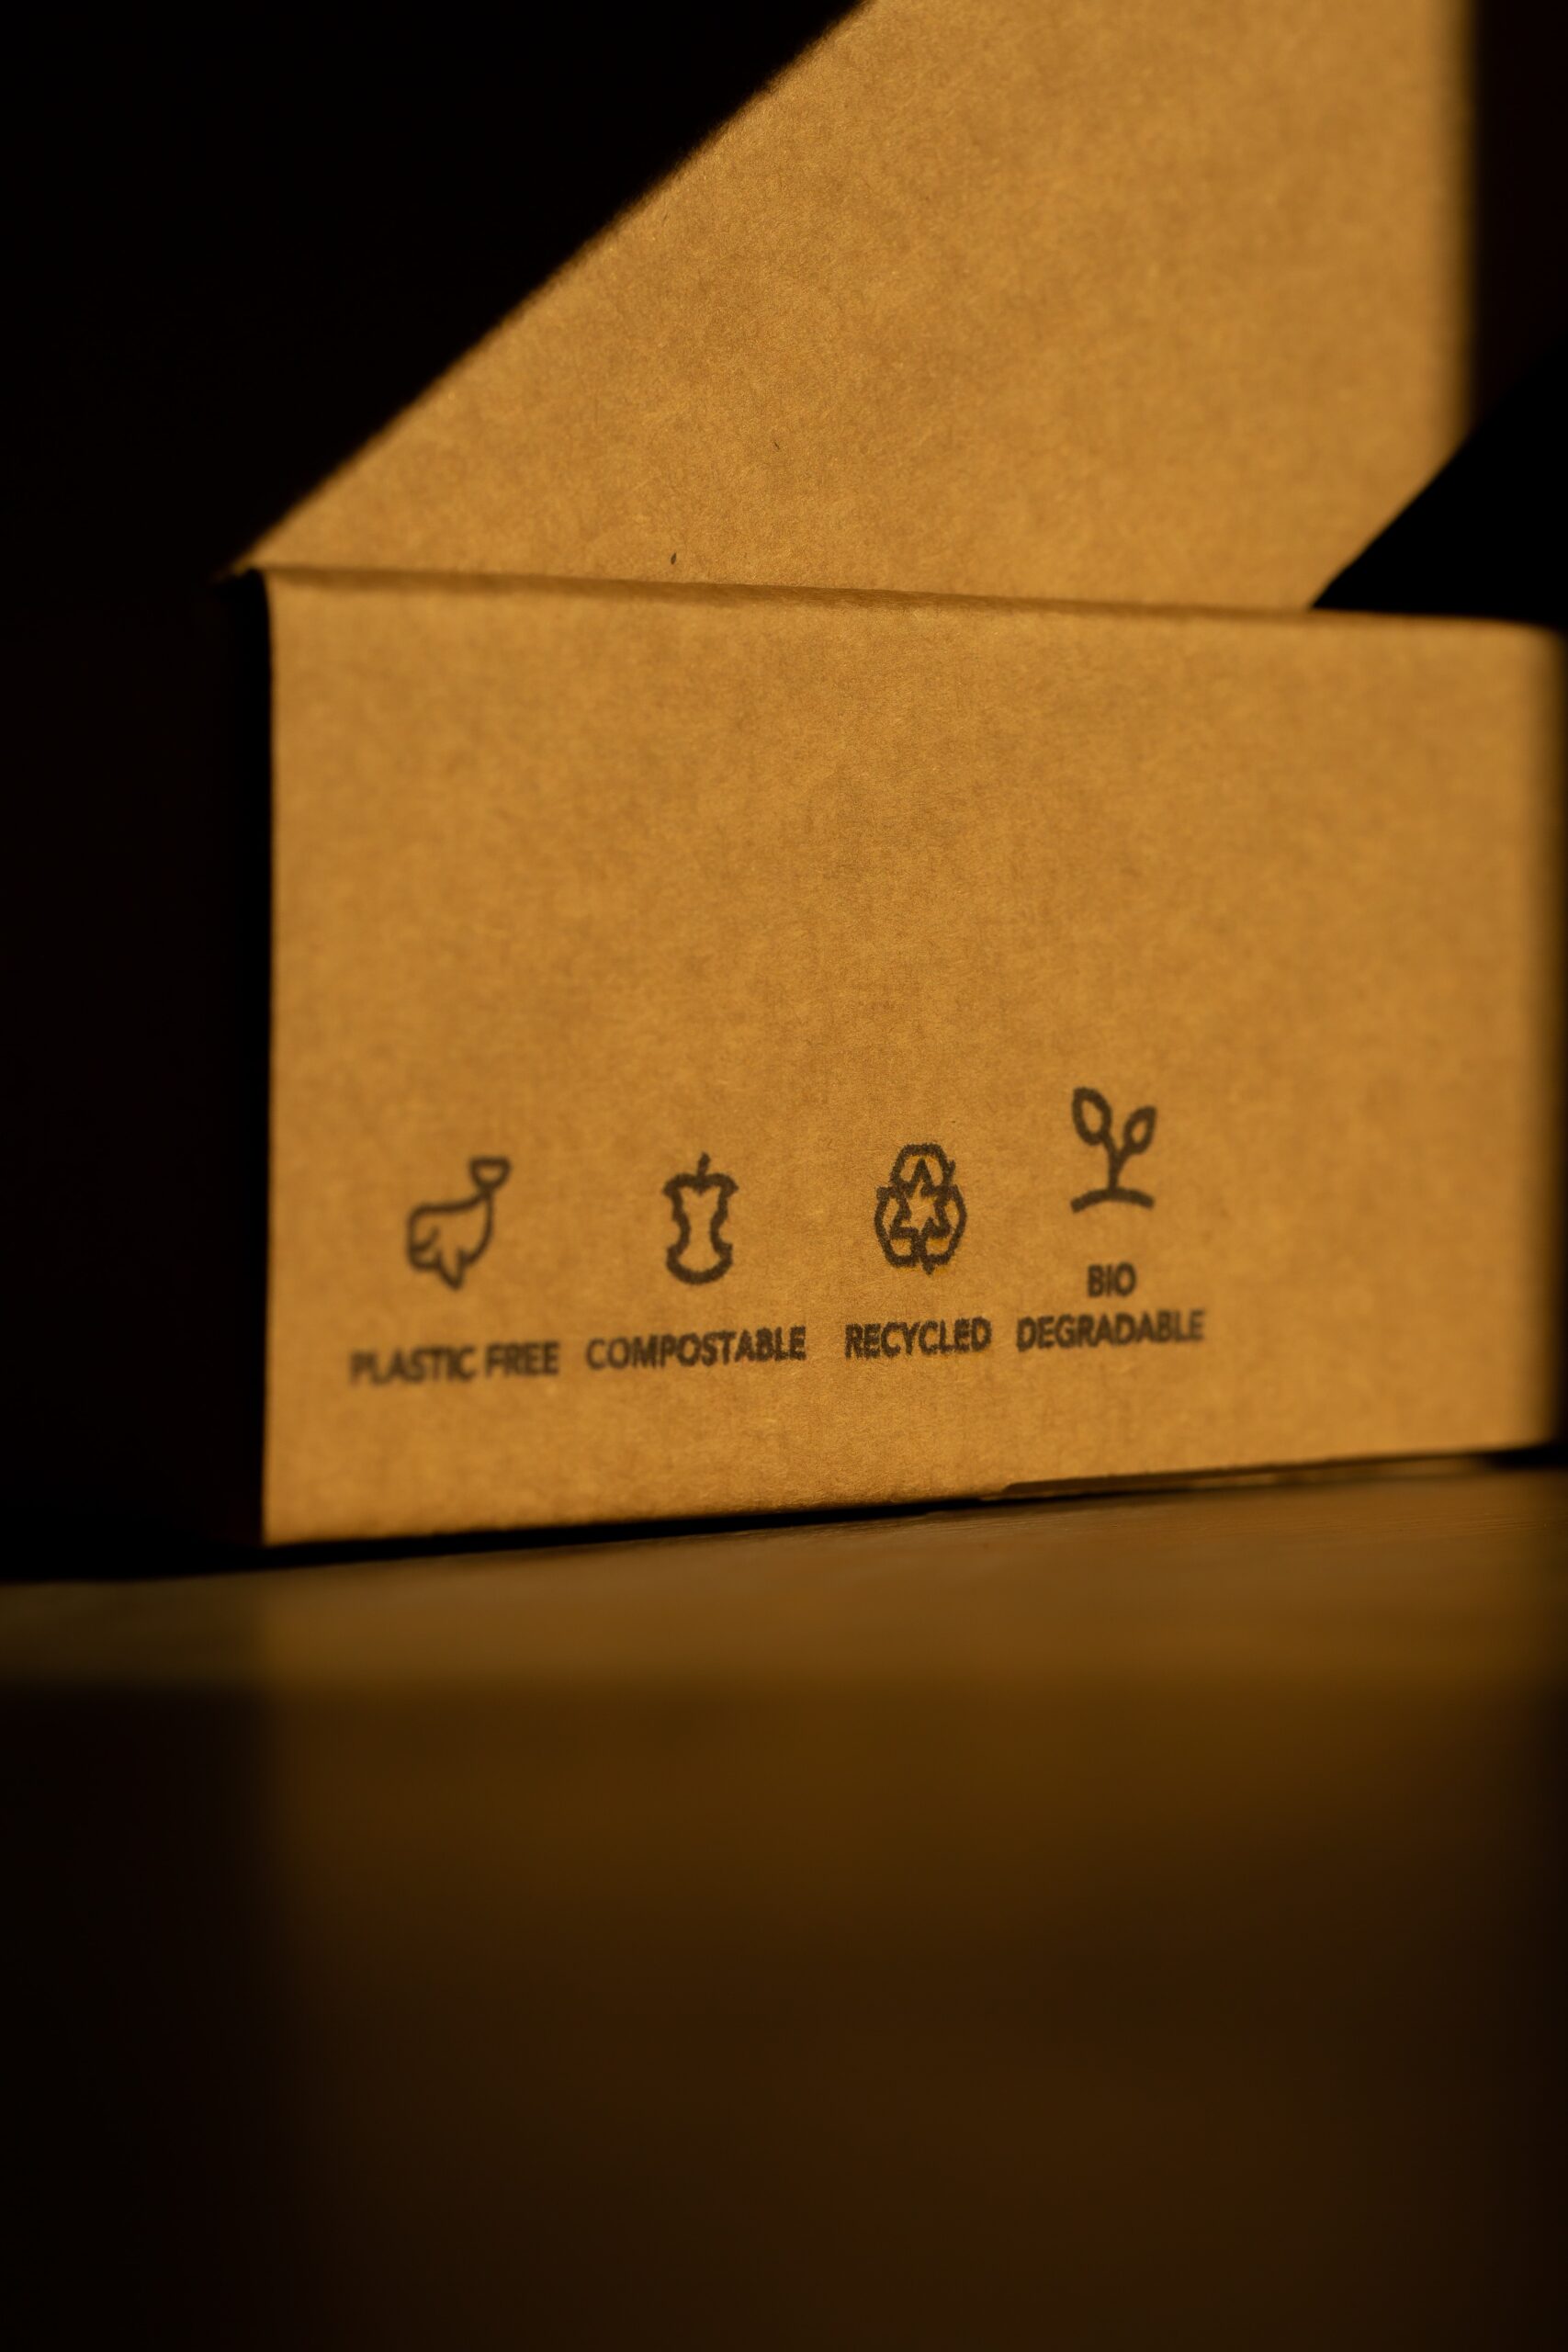 Care labels on a box for sustainability